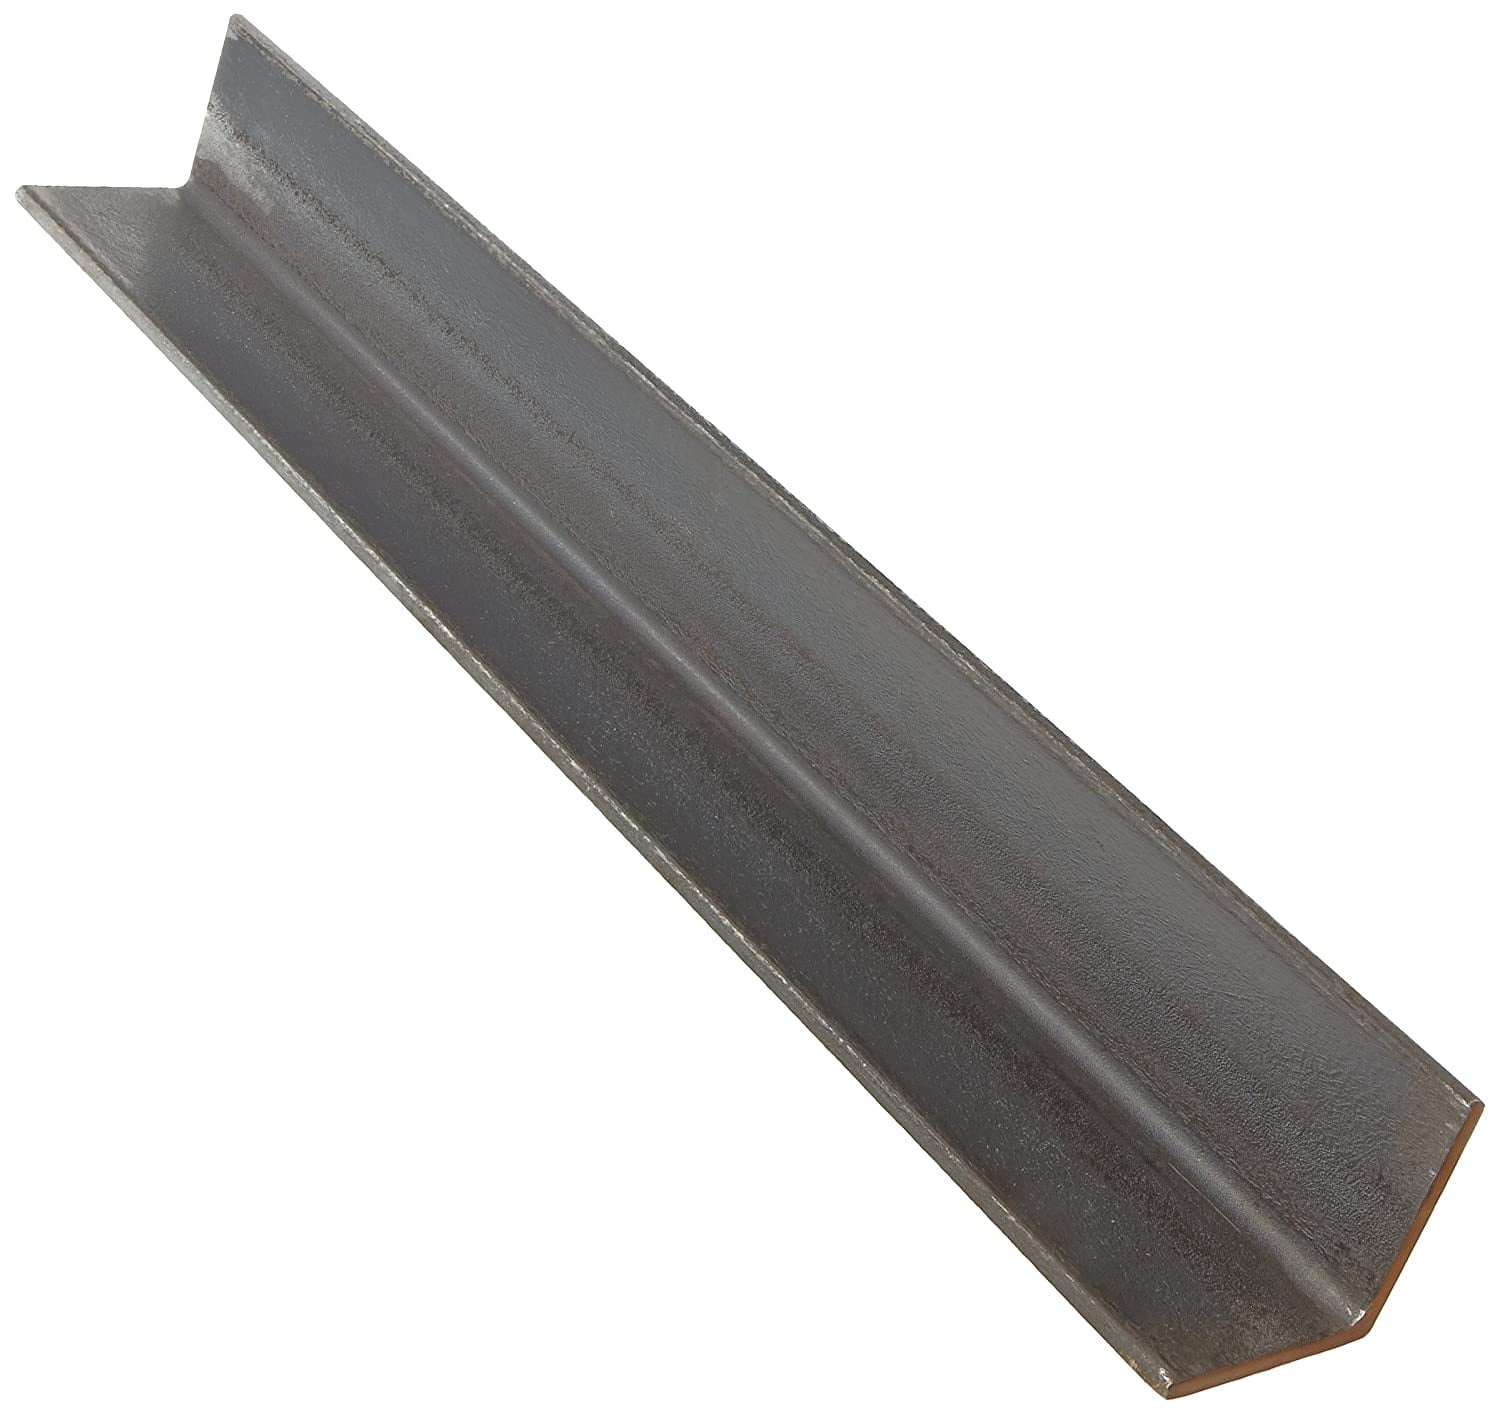 0.250 Thick Alloy 1018 3-1/2 W X 3 ft Unpolished Carbon Steel Rectangular Bar Stock L 